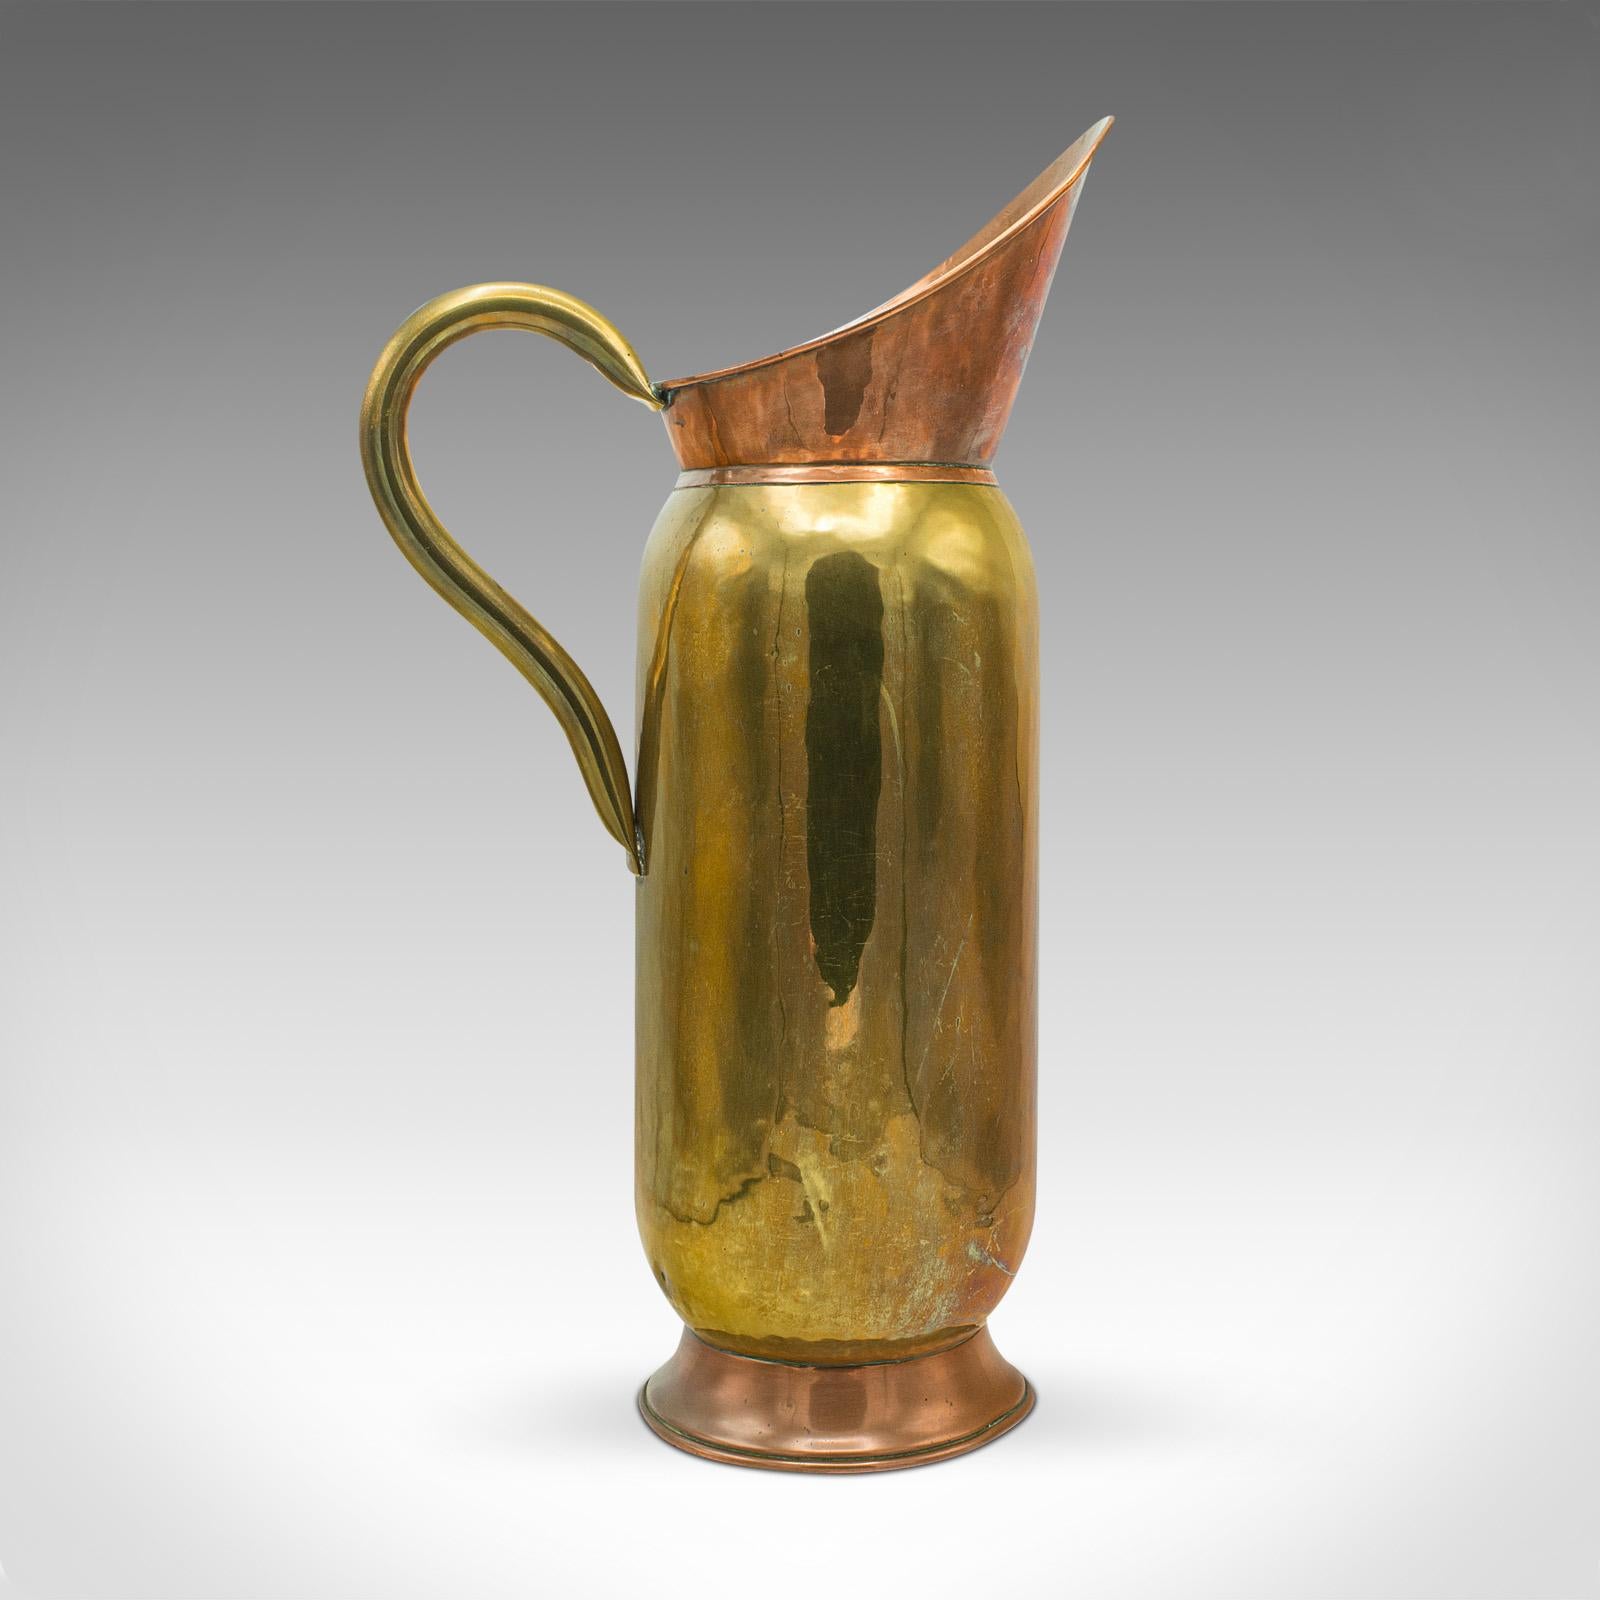 This is a tall antique pouring jug. An English, brass and copper ewer or long stem vase, dating to the late Victorian period, circa 1900.

Distinctive use of Dual materials creates an attractive appearance
Displaying a desirable aged patina and